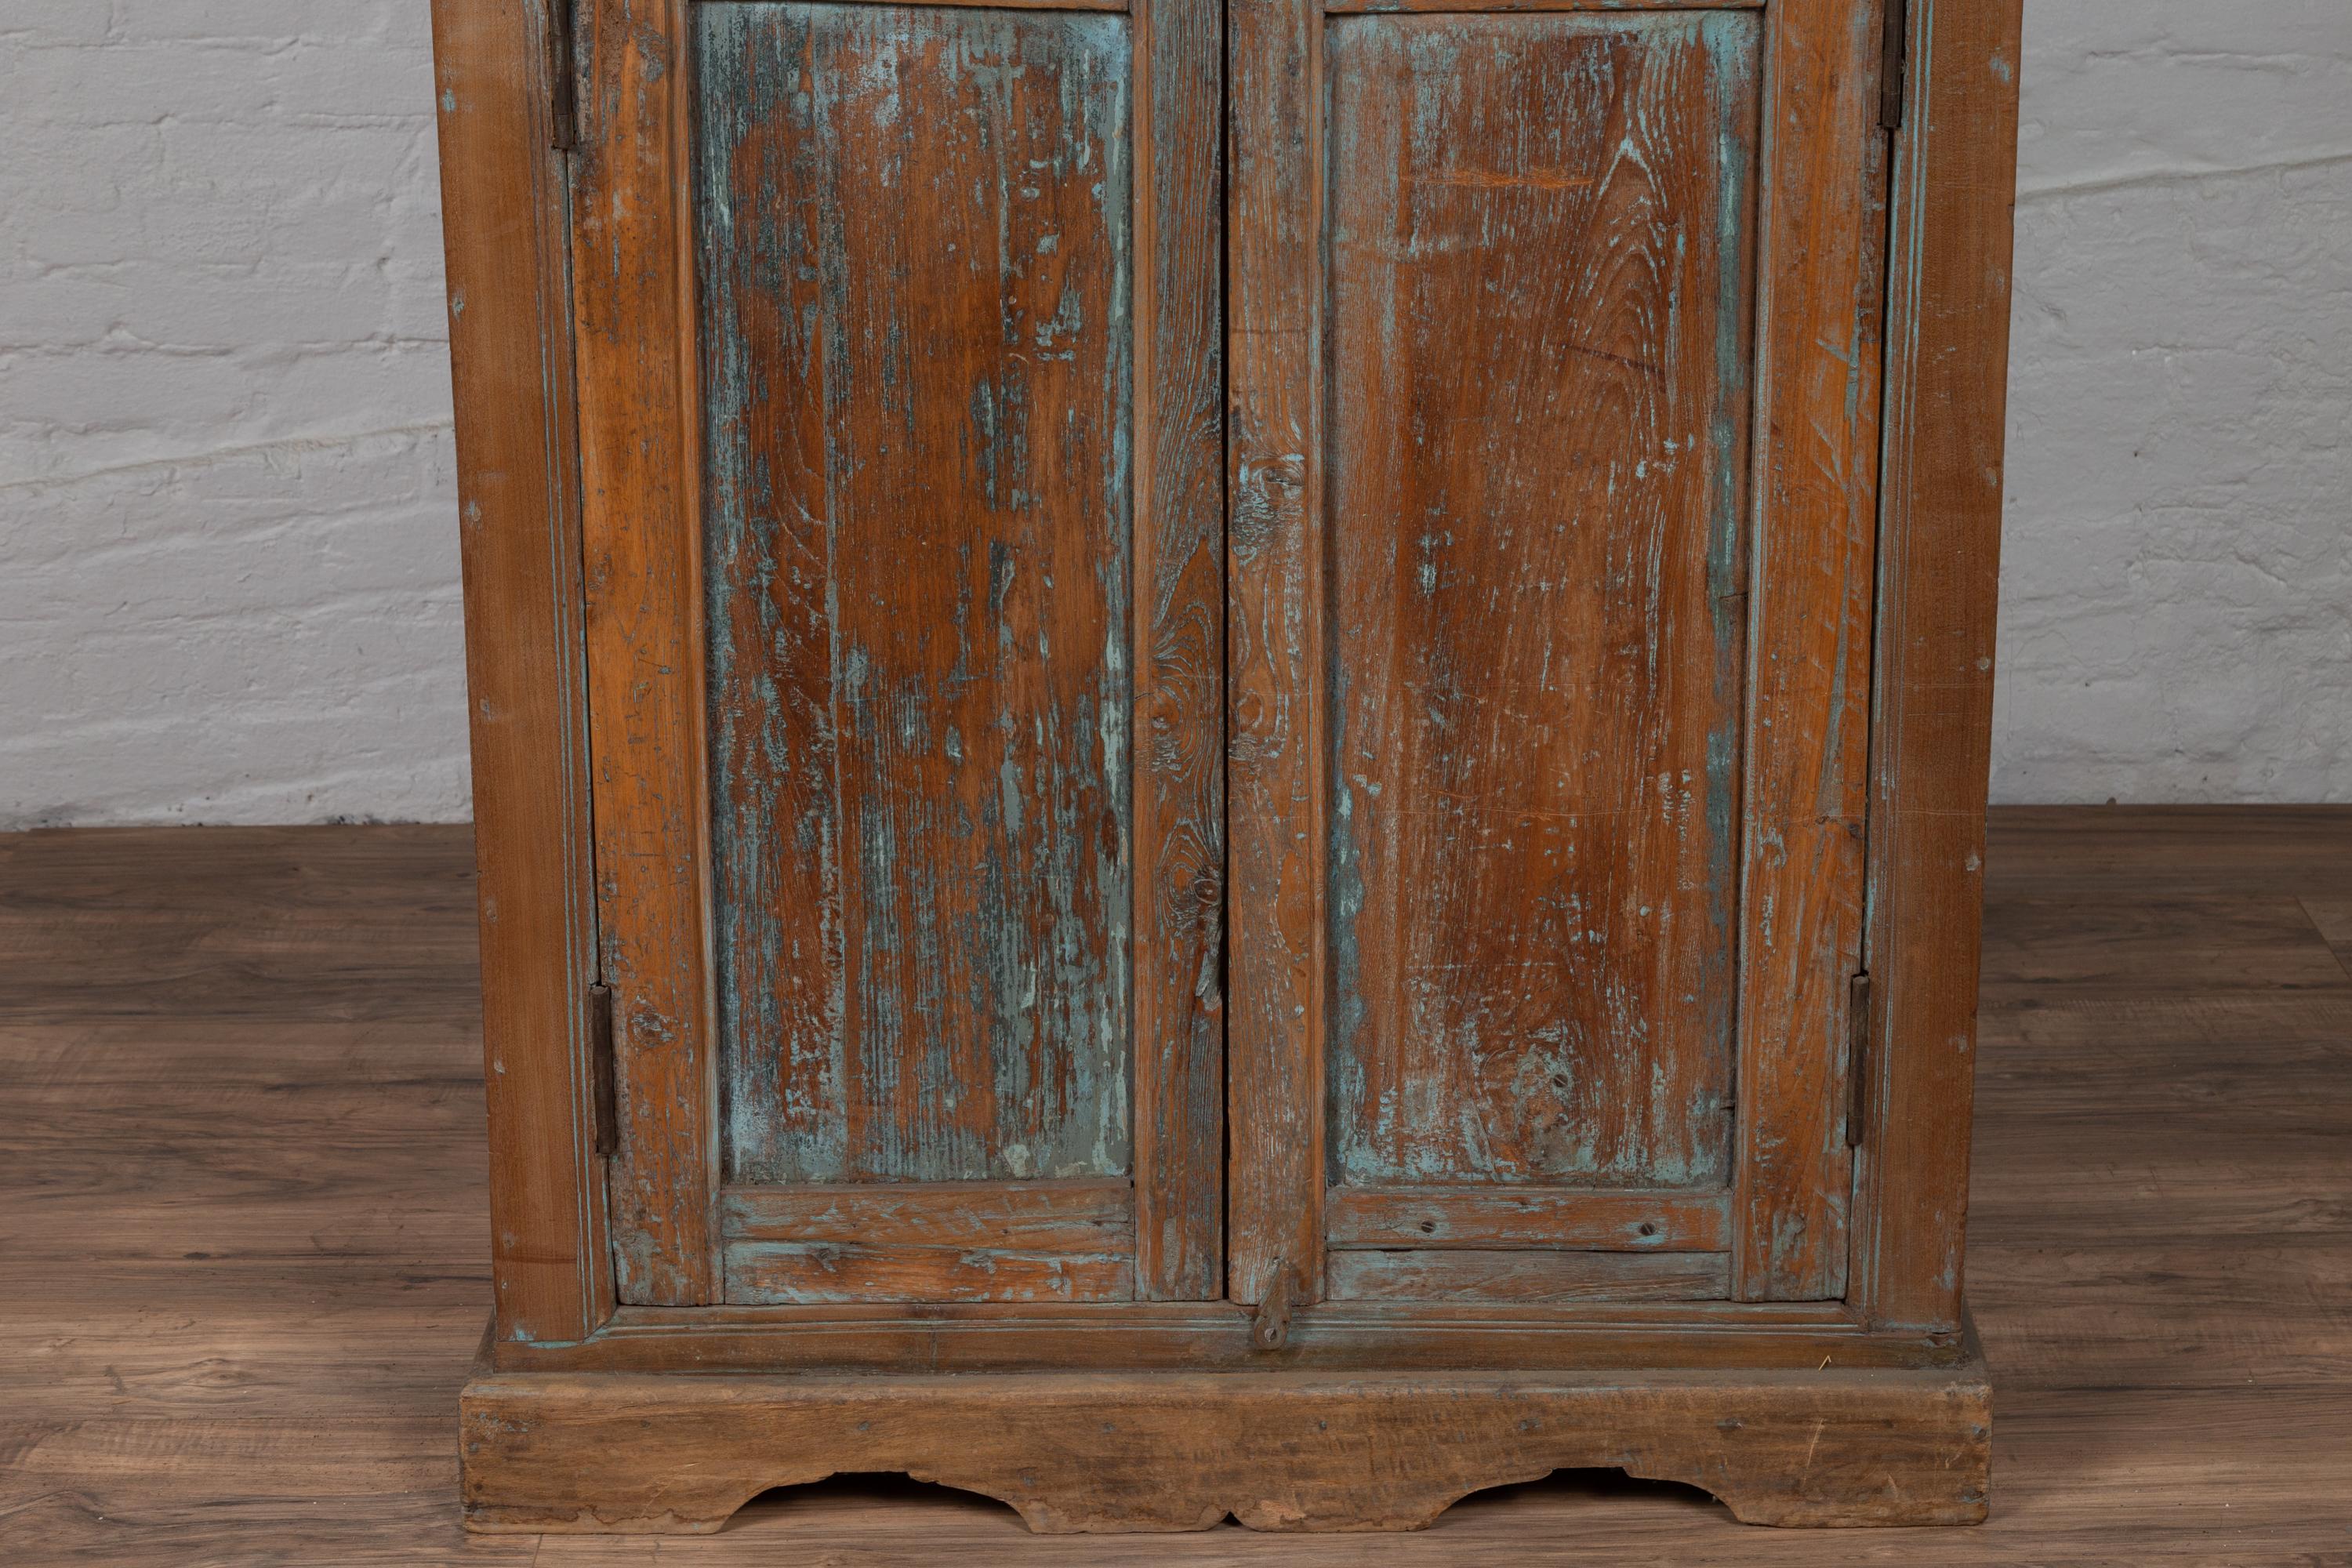 Early 20th Century Indian Rustic Wooden Kitchen Cabinet with Distressed Finish In Good Condition For Sale In Yonkers, NY